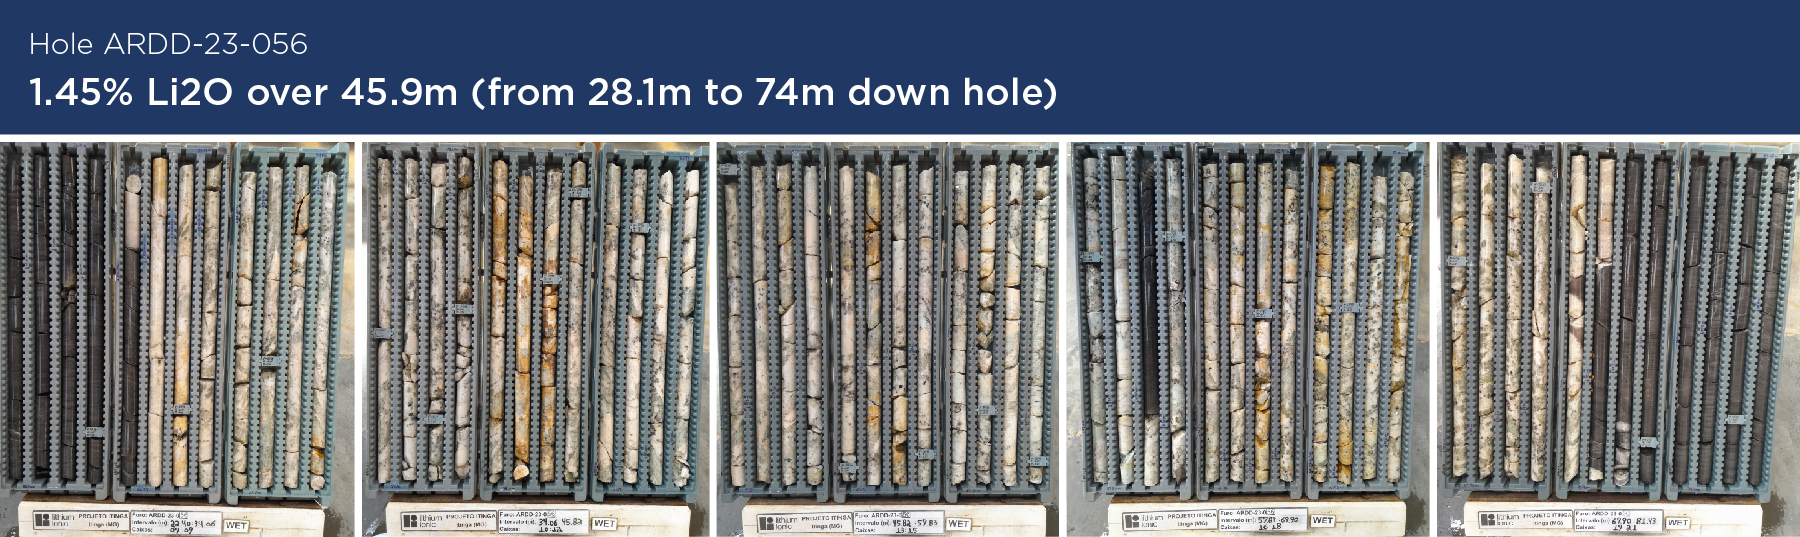 Figure 3: Core photo of holes ARDD-23-056